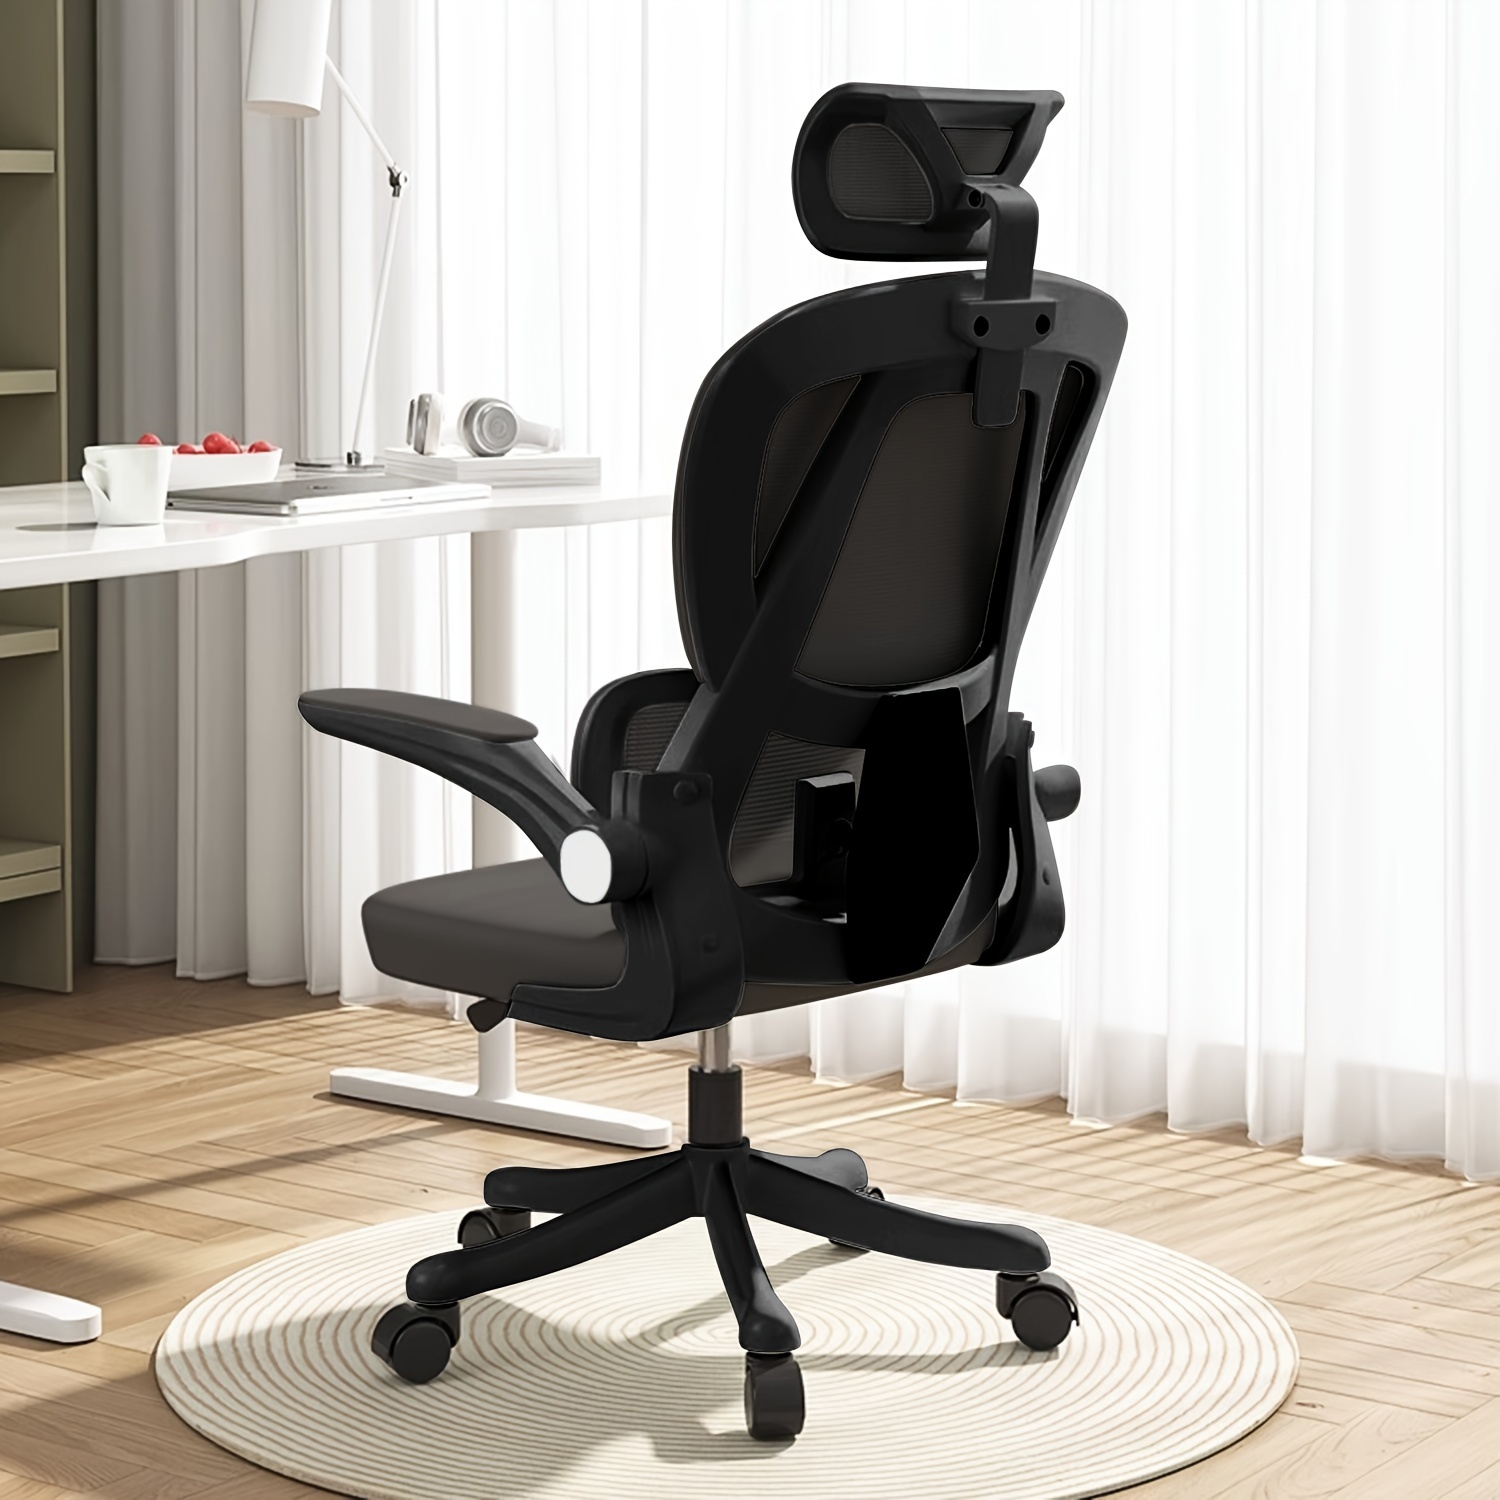 

Ergonomic Office Chair Comfort Home Desk Chair Adjustable High Back Mesh Chair Lumbar Support Computer Chair With Flip-up Arms For Work, Study, Gaming